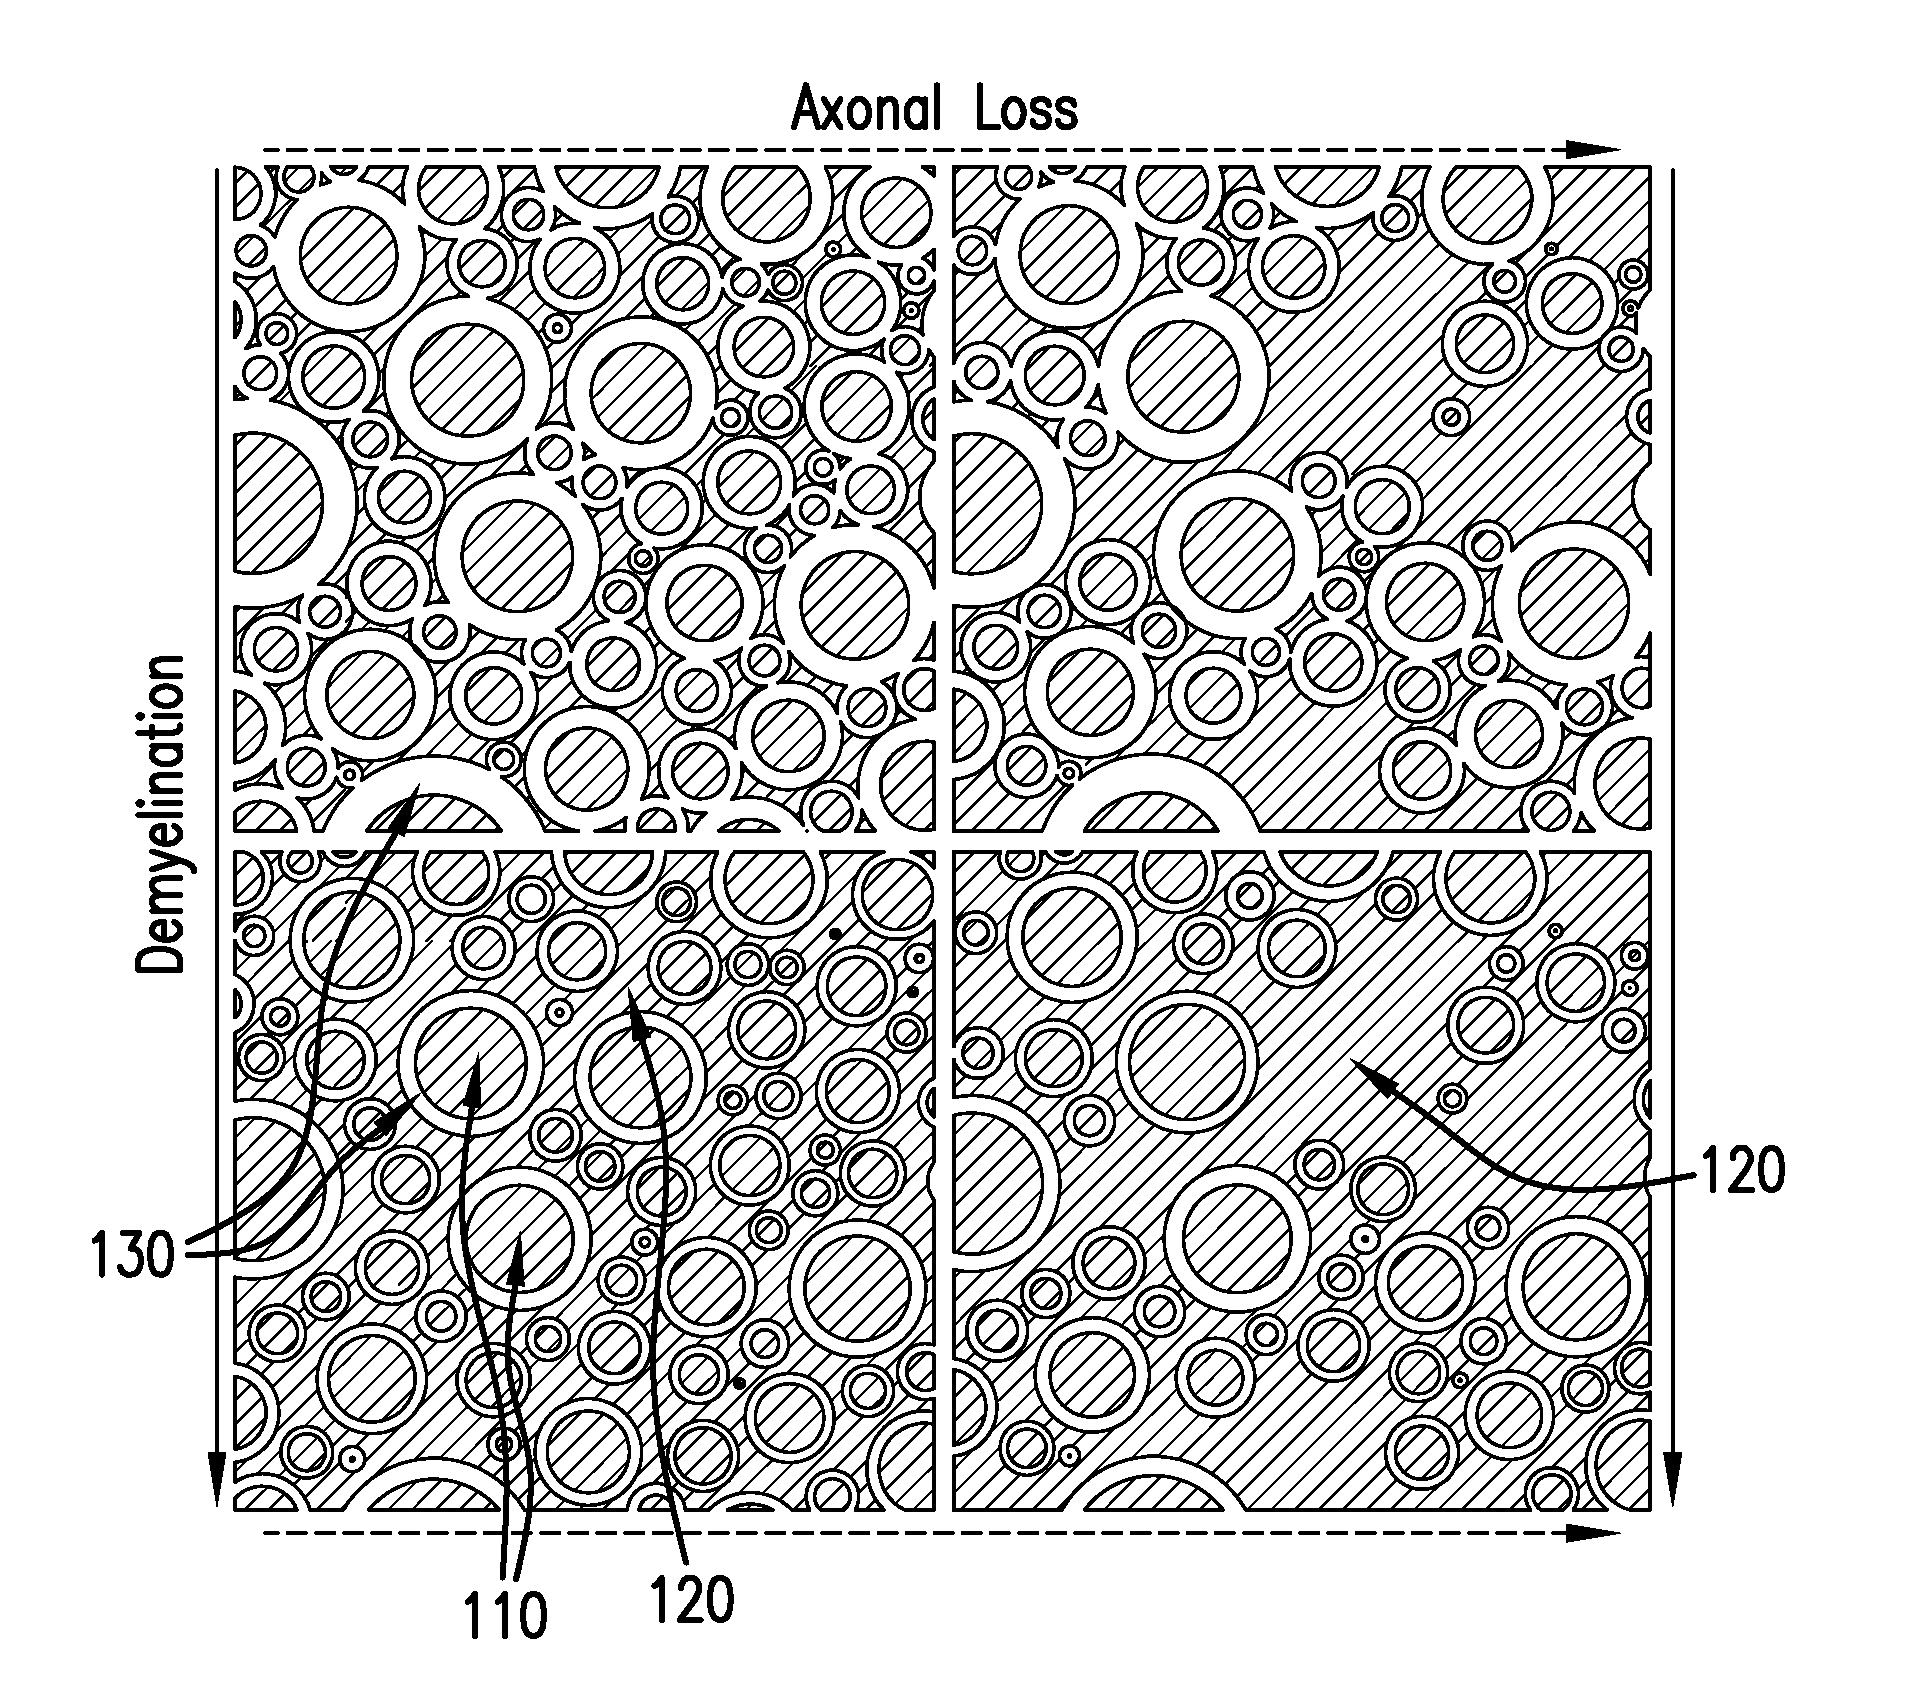 System, method and computer accessible mediums or determining neurodegeneration